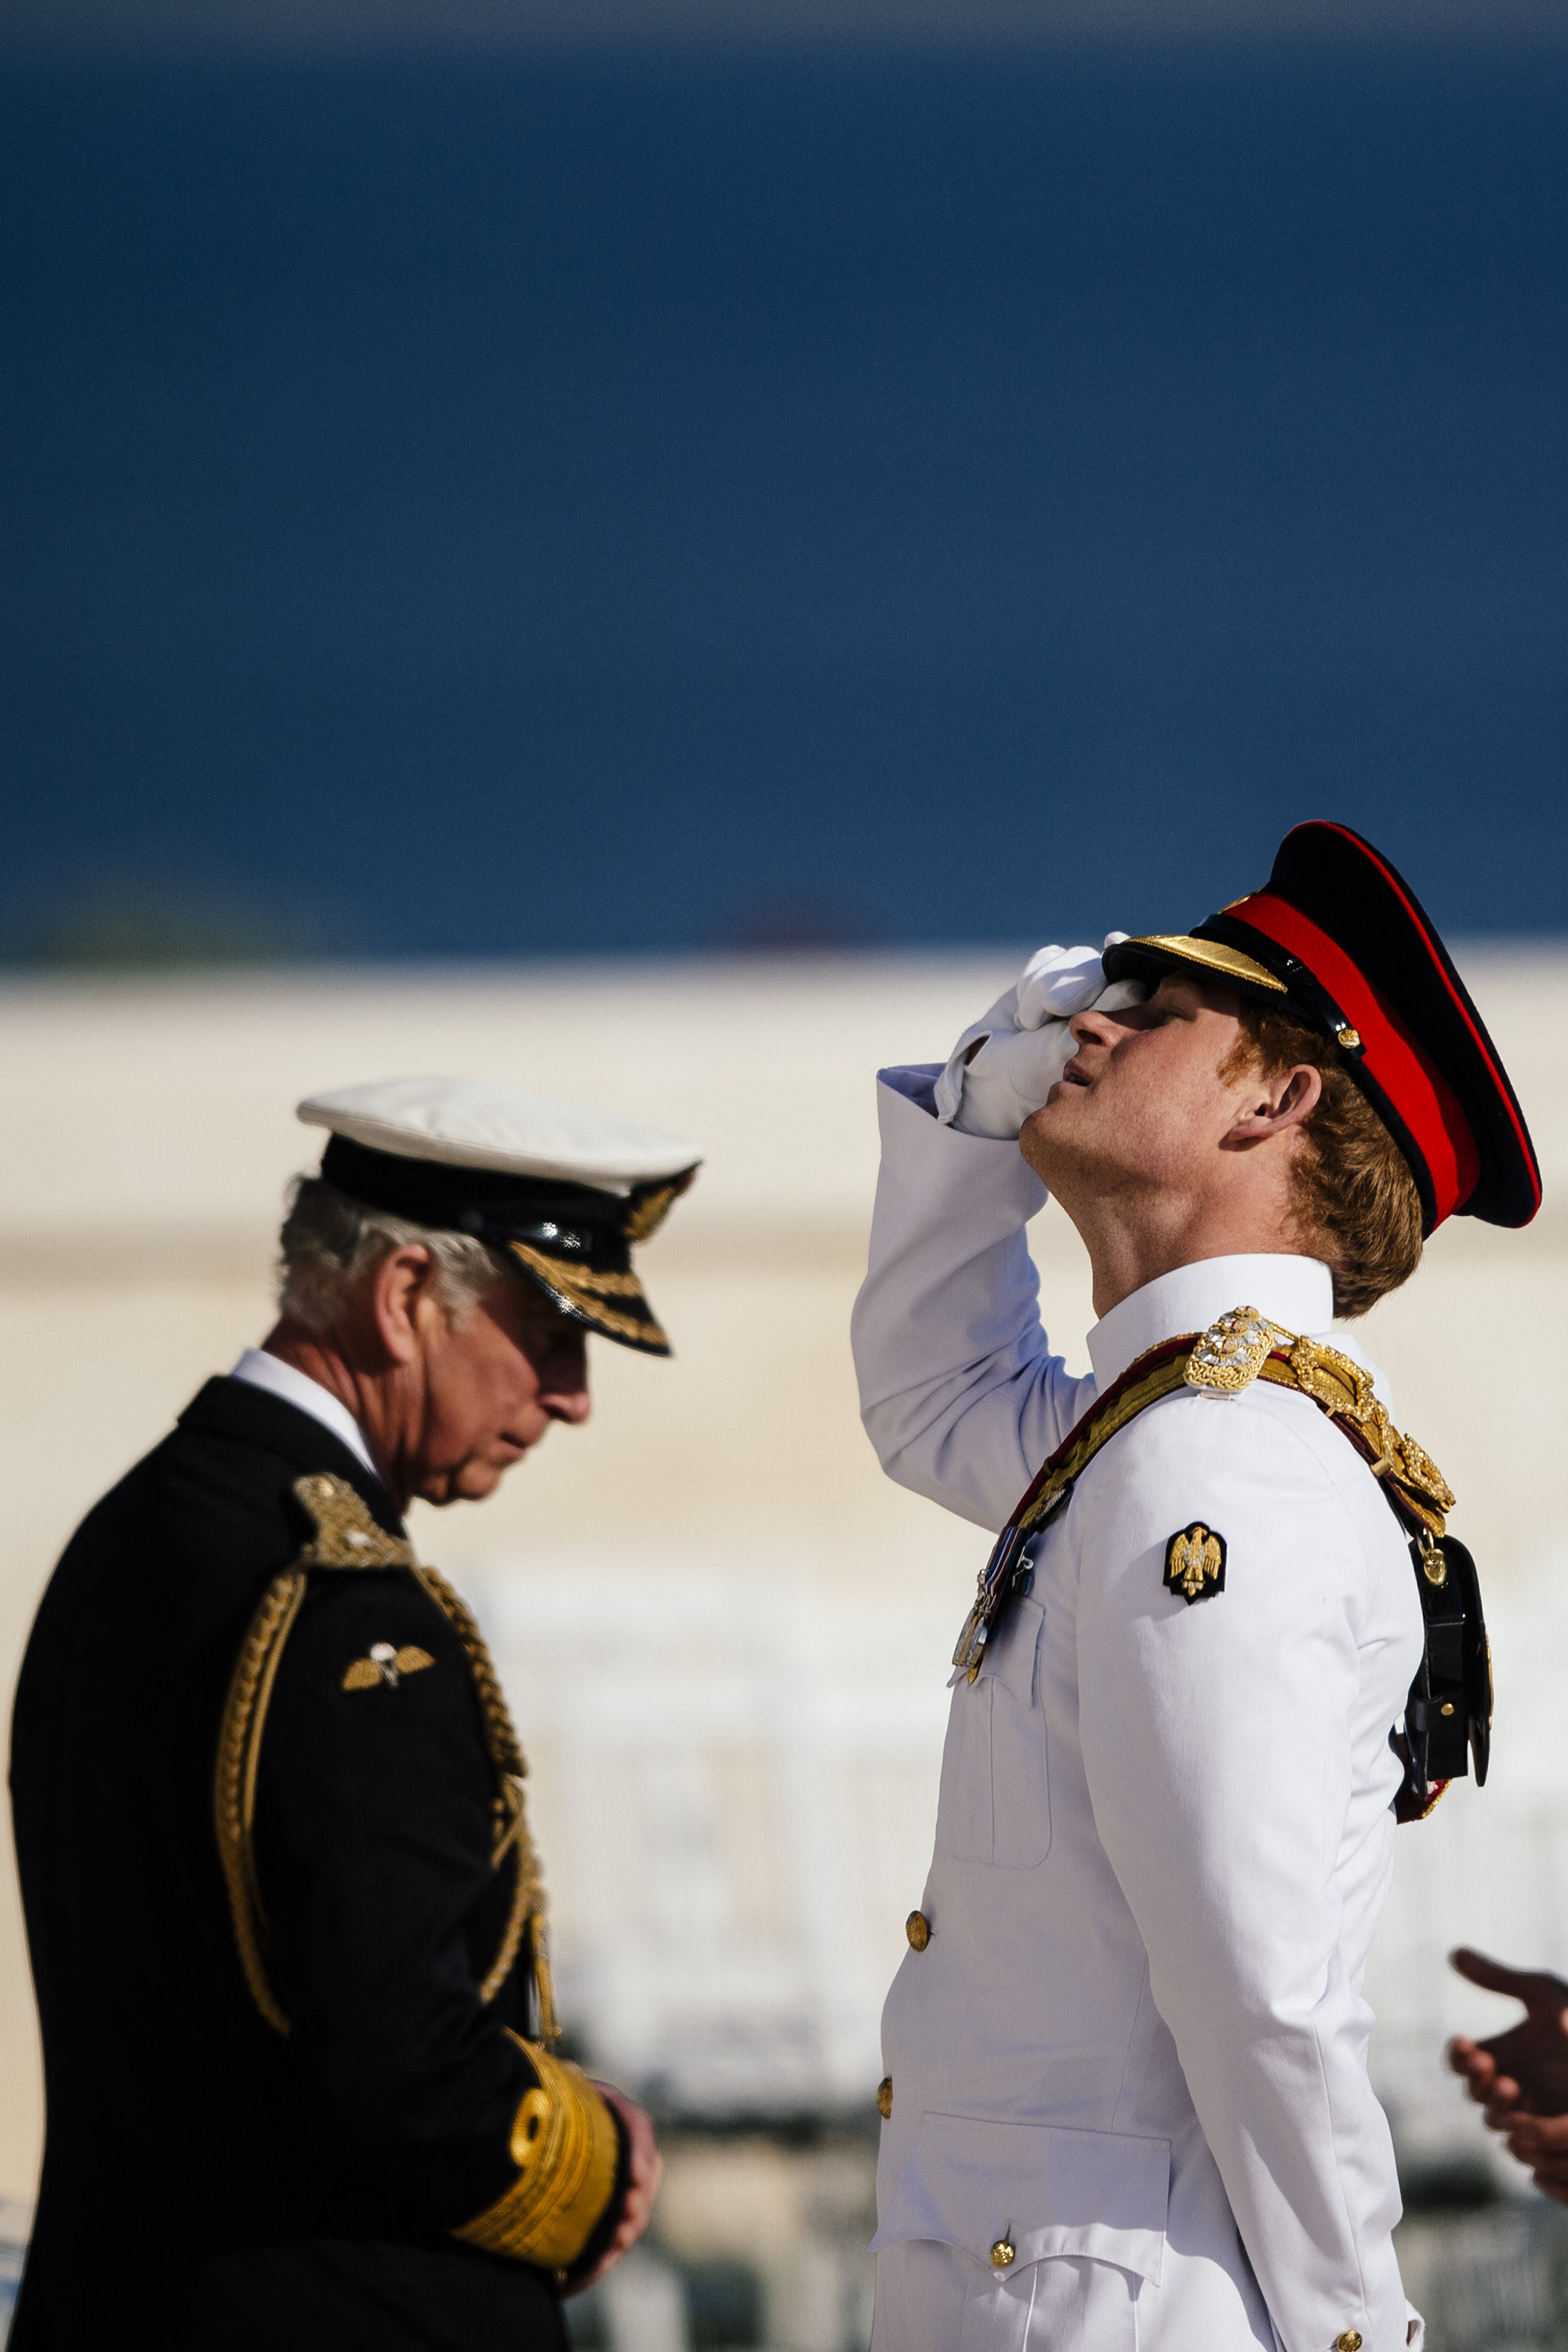 King Charles III and Prince Harry attending a memorial service marking the 100th anniversary of the start of the Battle of Gallipoli on the Gallipoli peninsula, Turkey on April 24, 2015 | Source: Getty Images